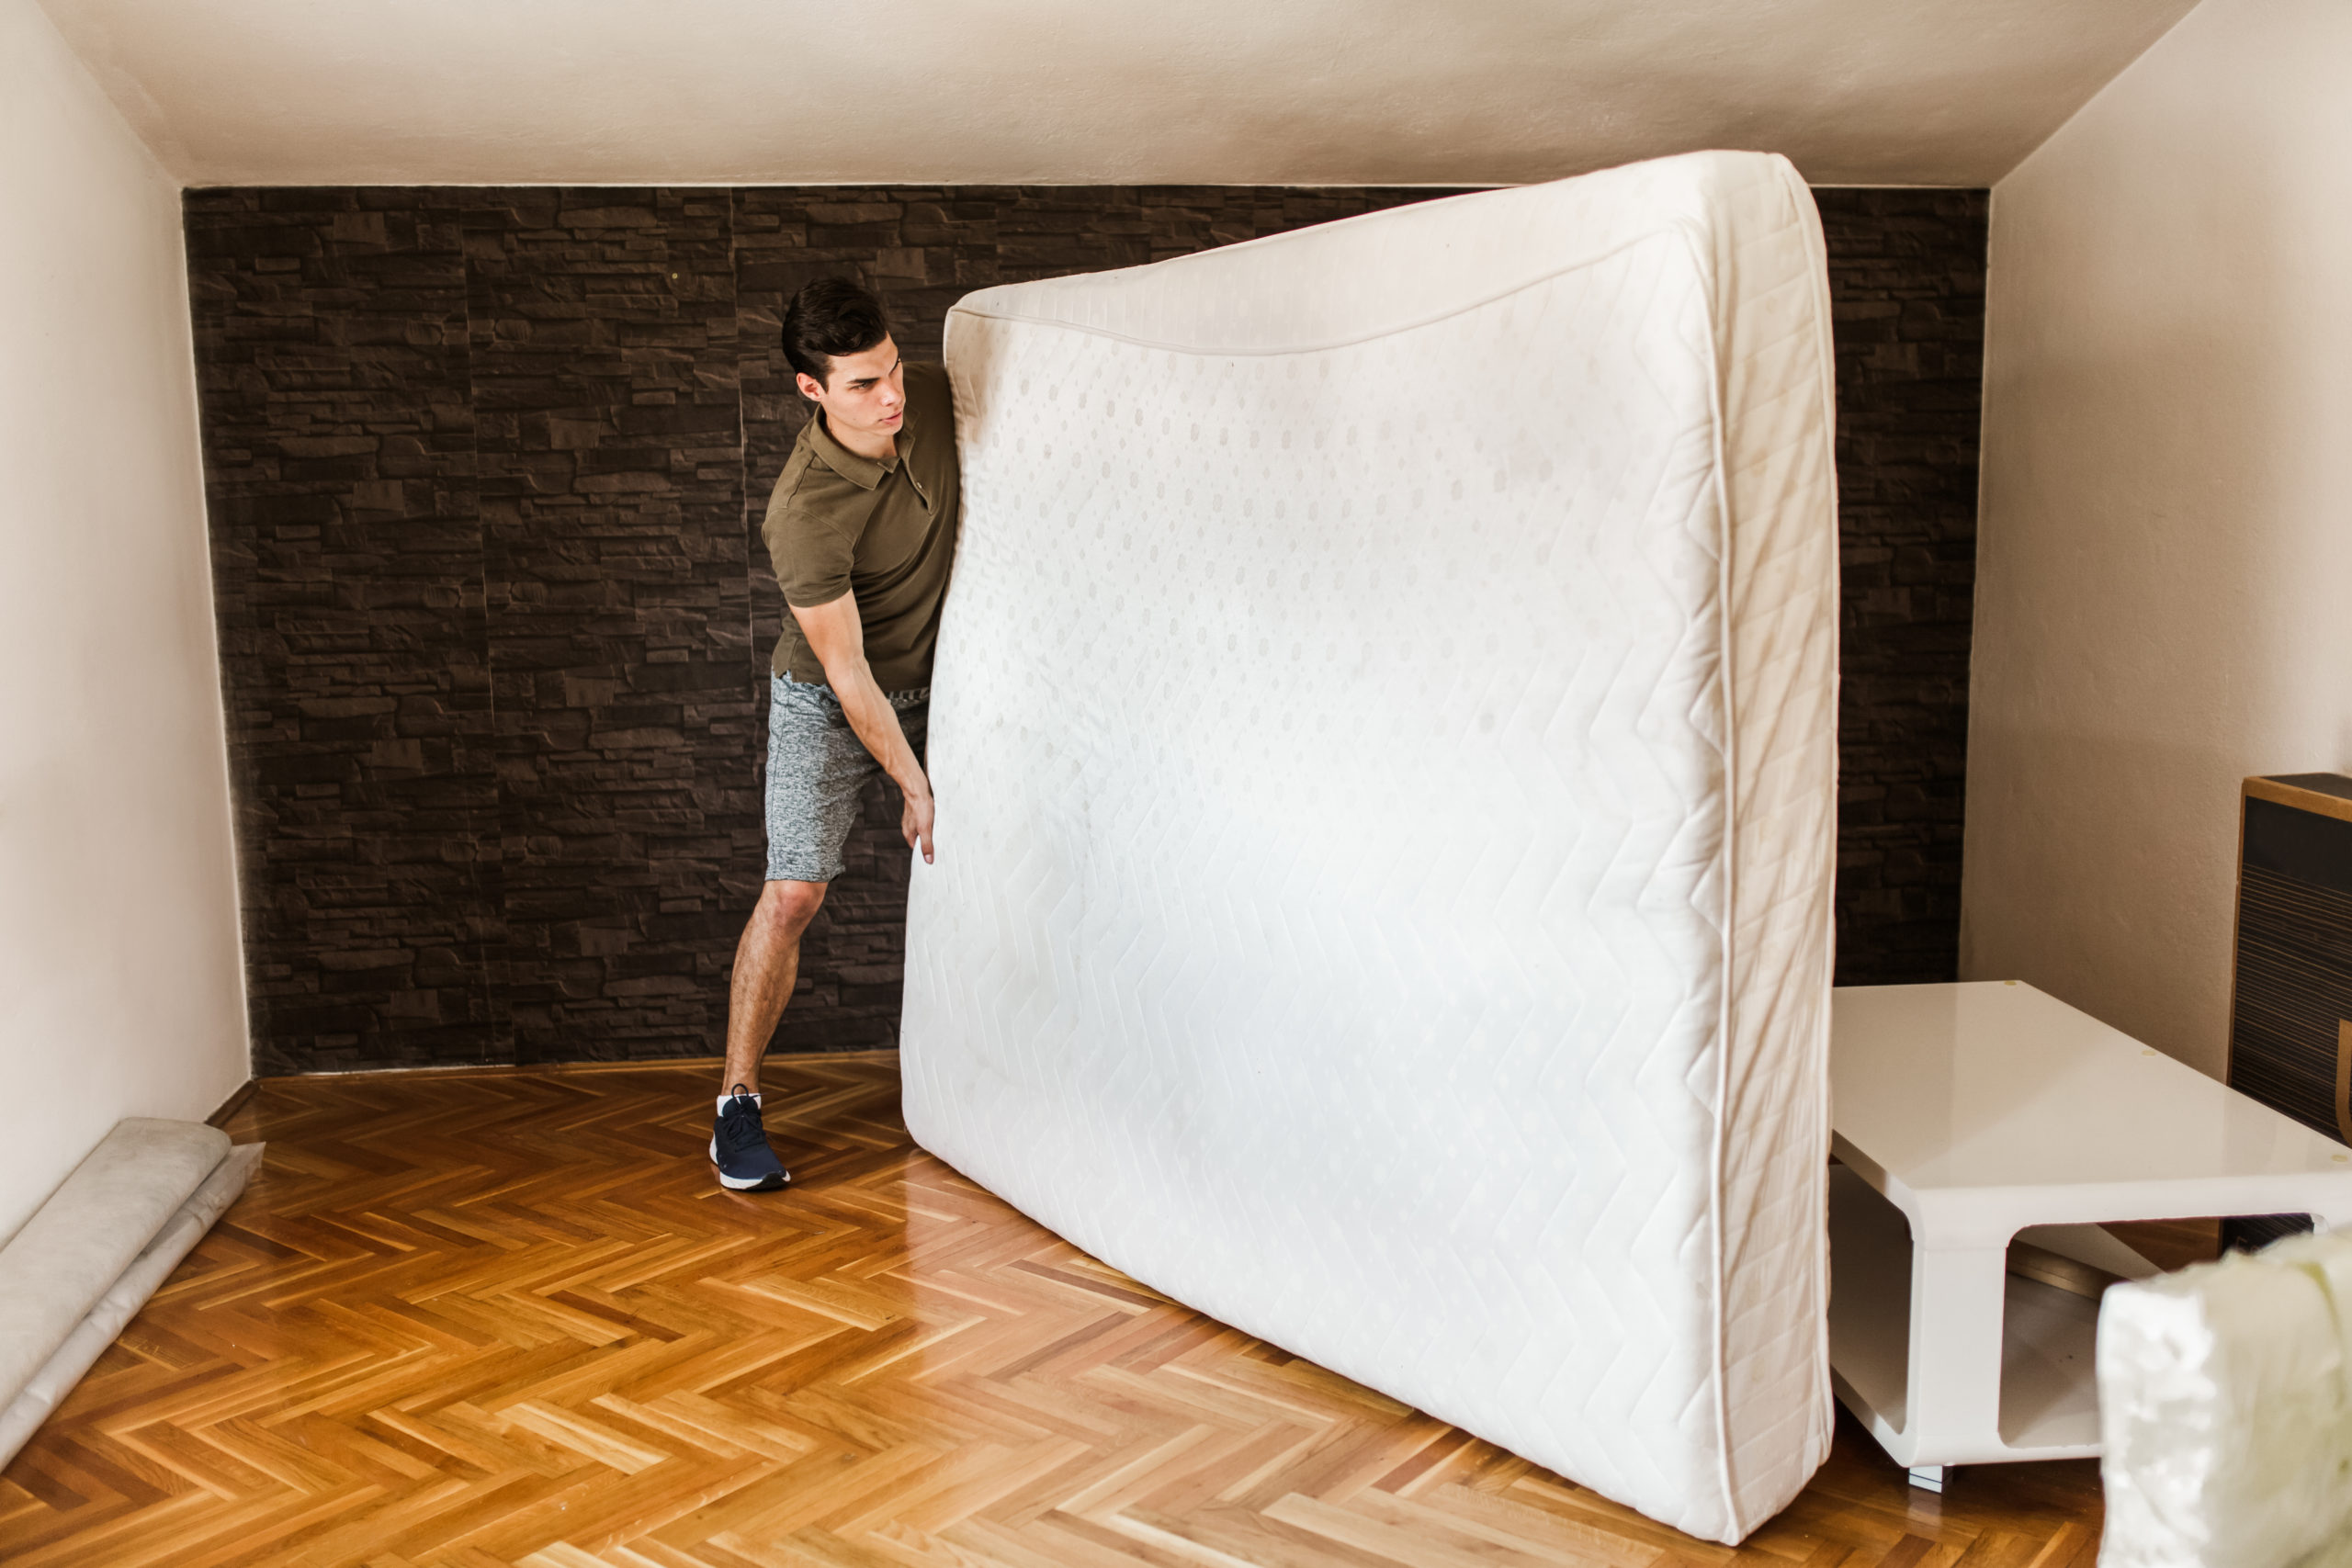 A Man Carries a Mattress While Moving Out of the Apartment